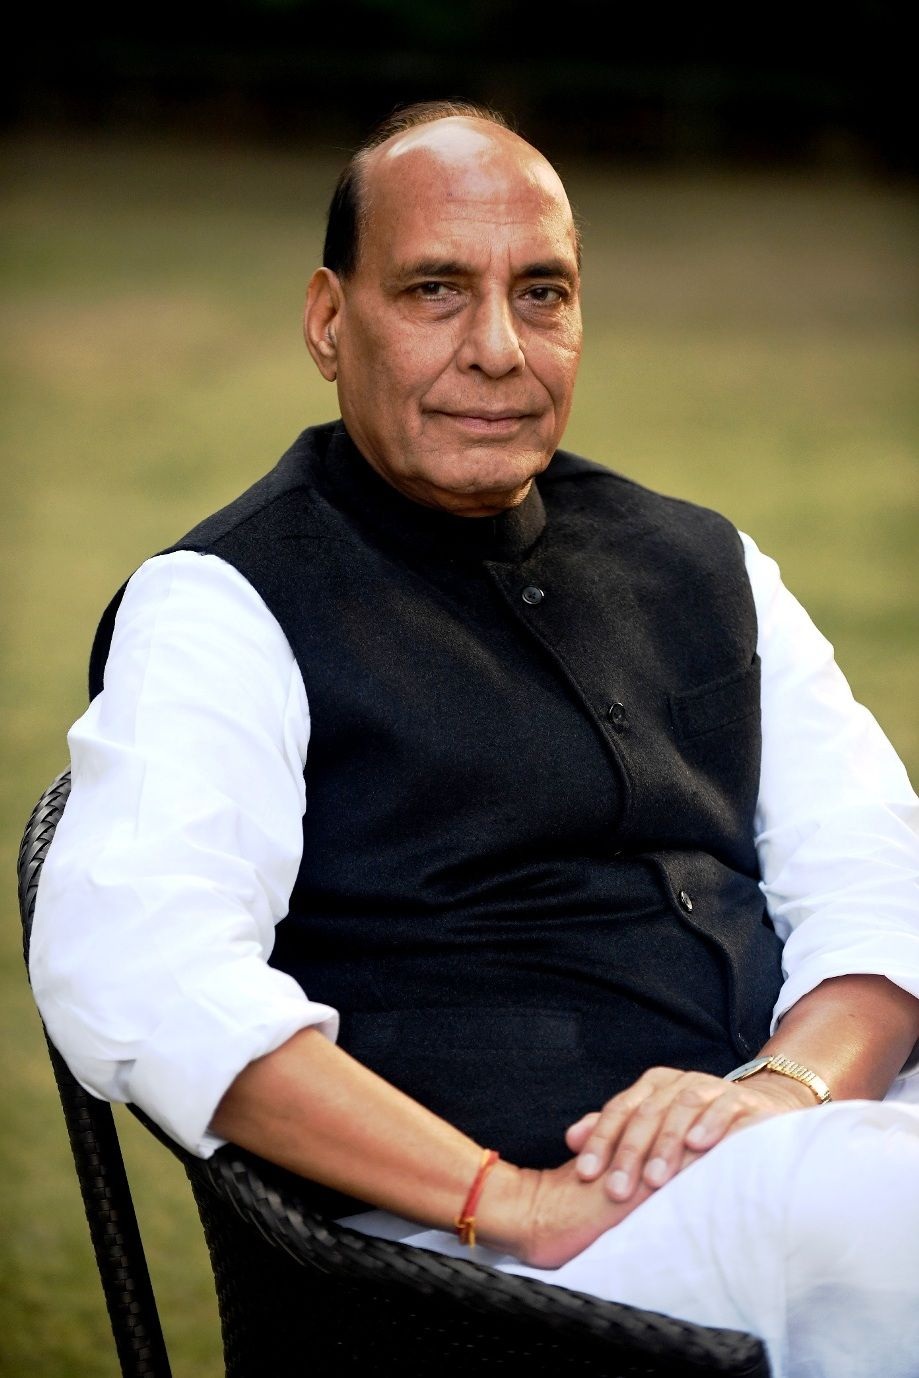 Rajnath Singh : This is new India that will give appropriate reply to any aggression